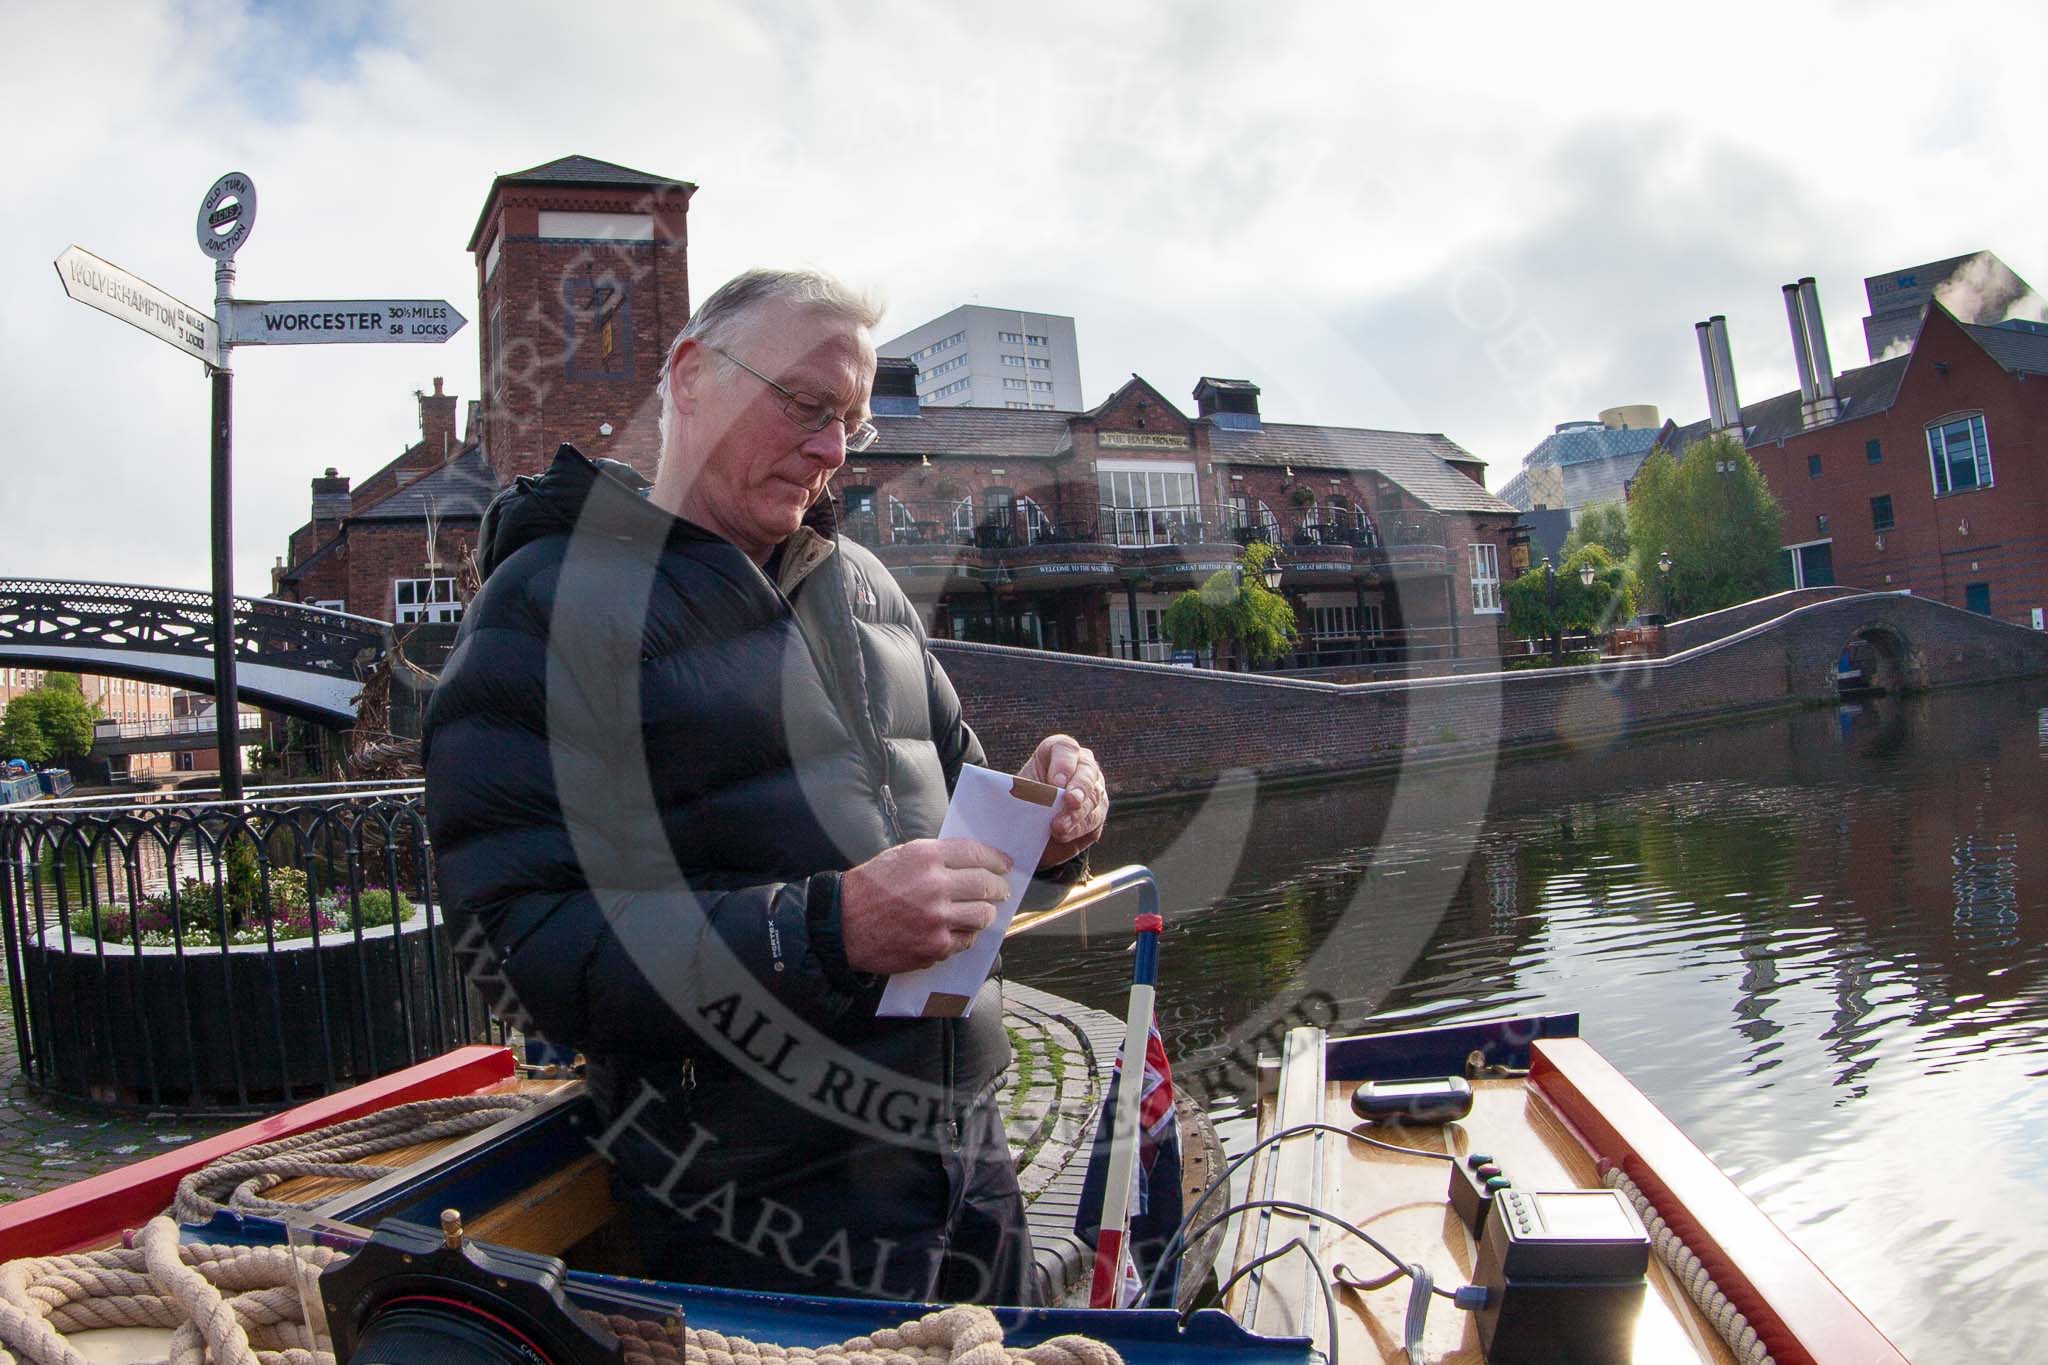 BCN Marathon Challenge 2013: Skipper Charley on board of NB "Felonious Mongoose", at Old Street Junction in the centre of Birmingham, at the start of the BCN Marathon Challenge, opening the sealed envelope with the challenges..
Birmingham Canal Navigation,


United Kingdom,
on 25 May 2013 at 07:58, image #28